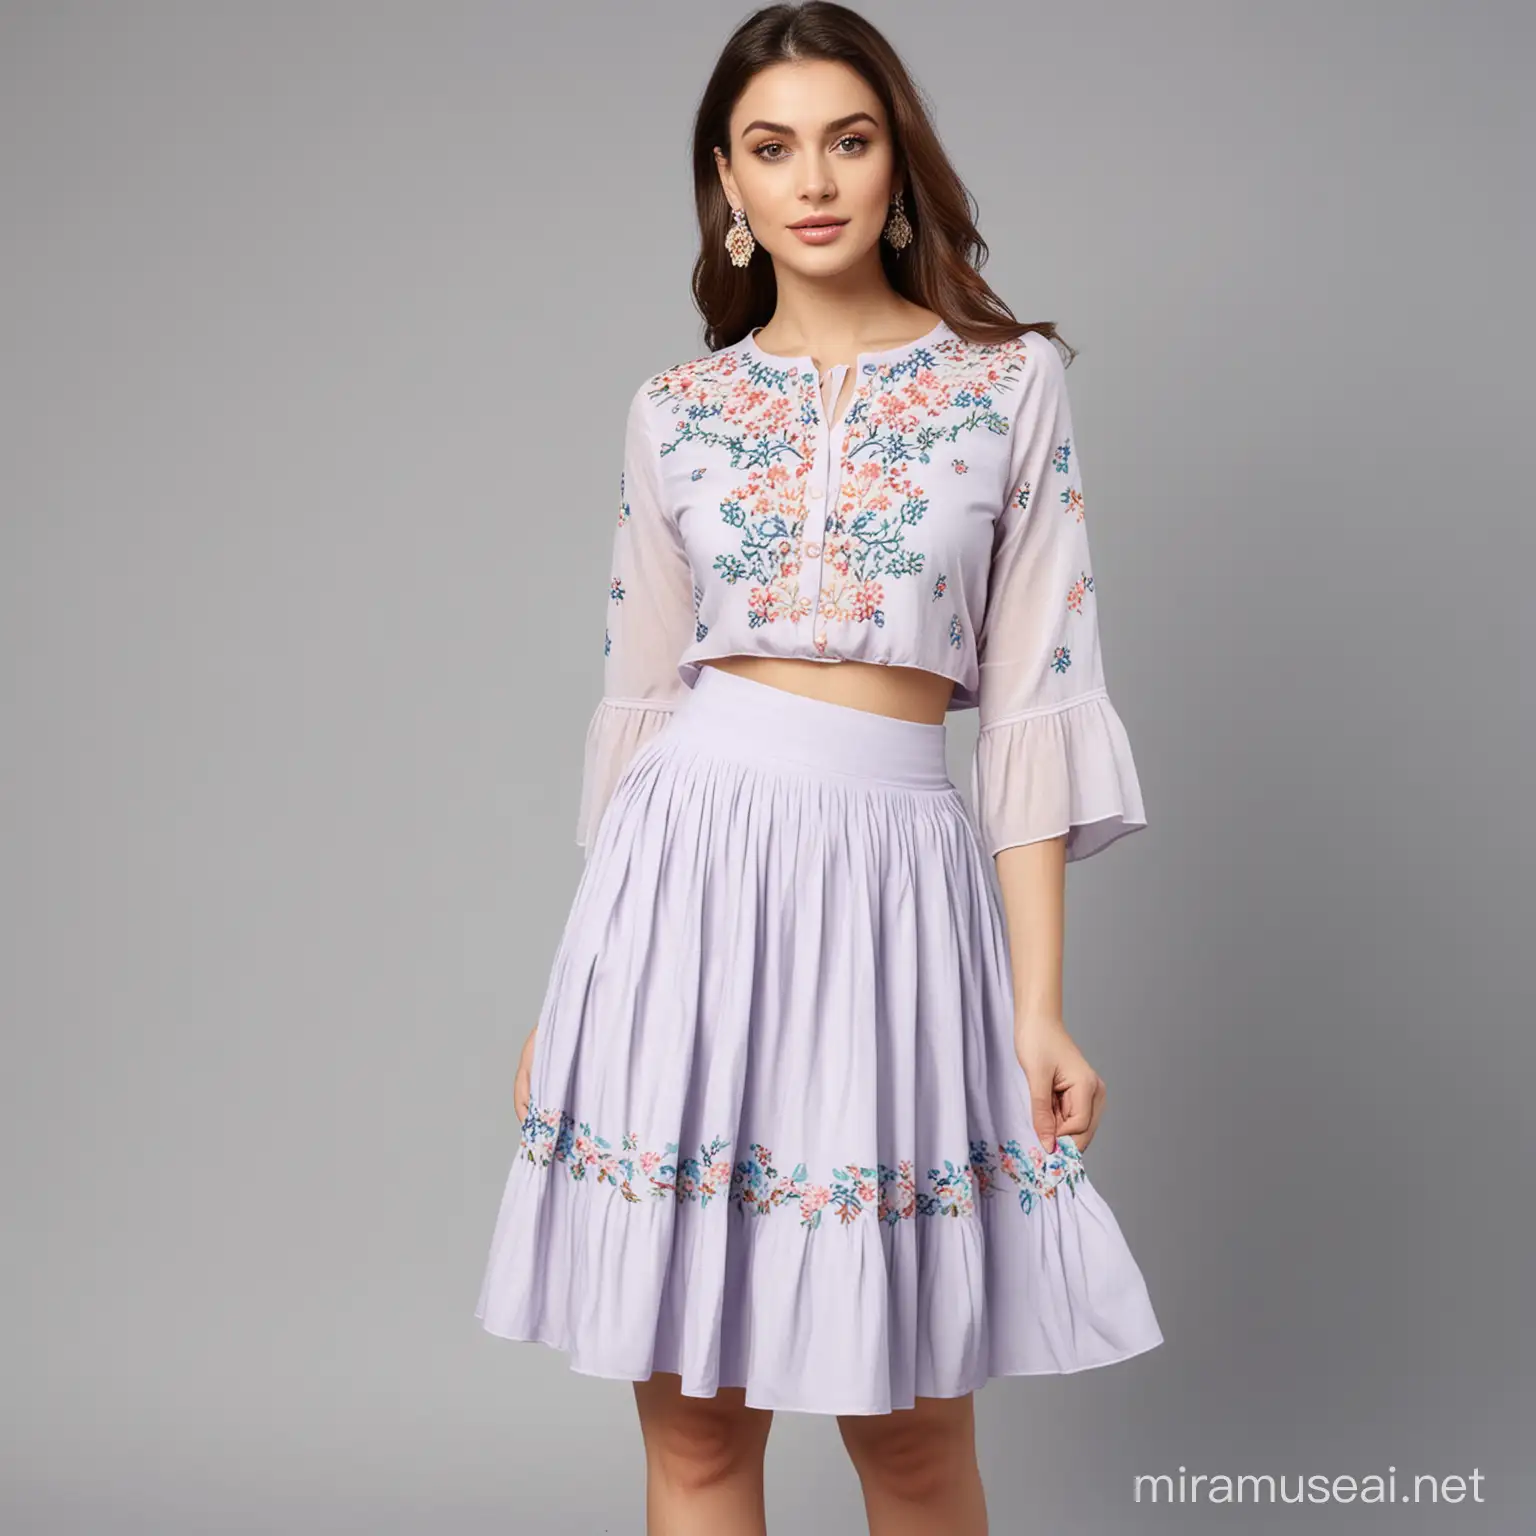 Elegant Womens Pastel Embroidered Skirt and Top Ensemble